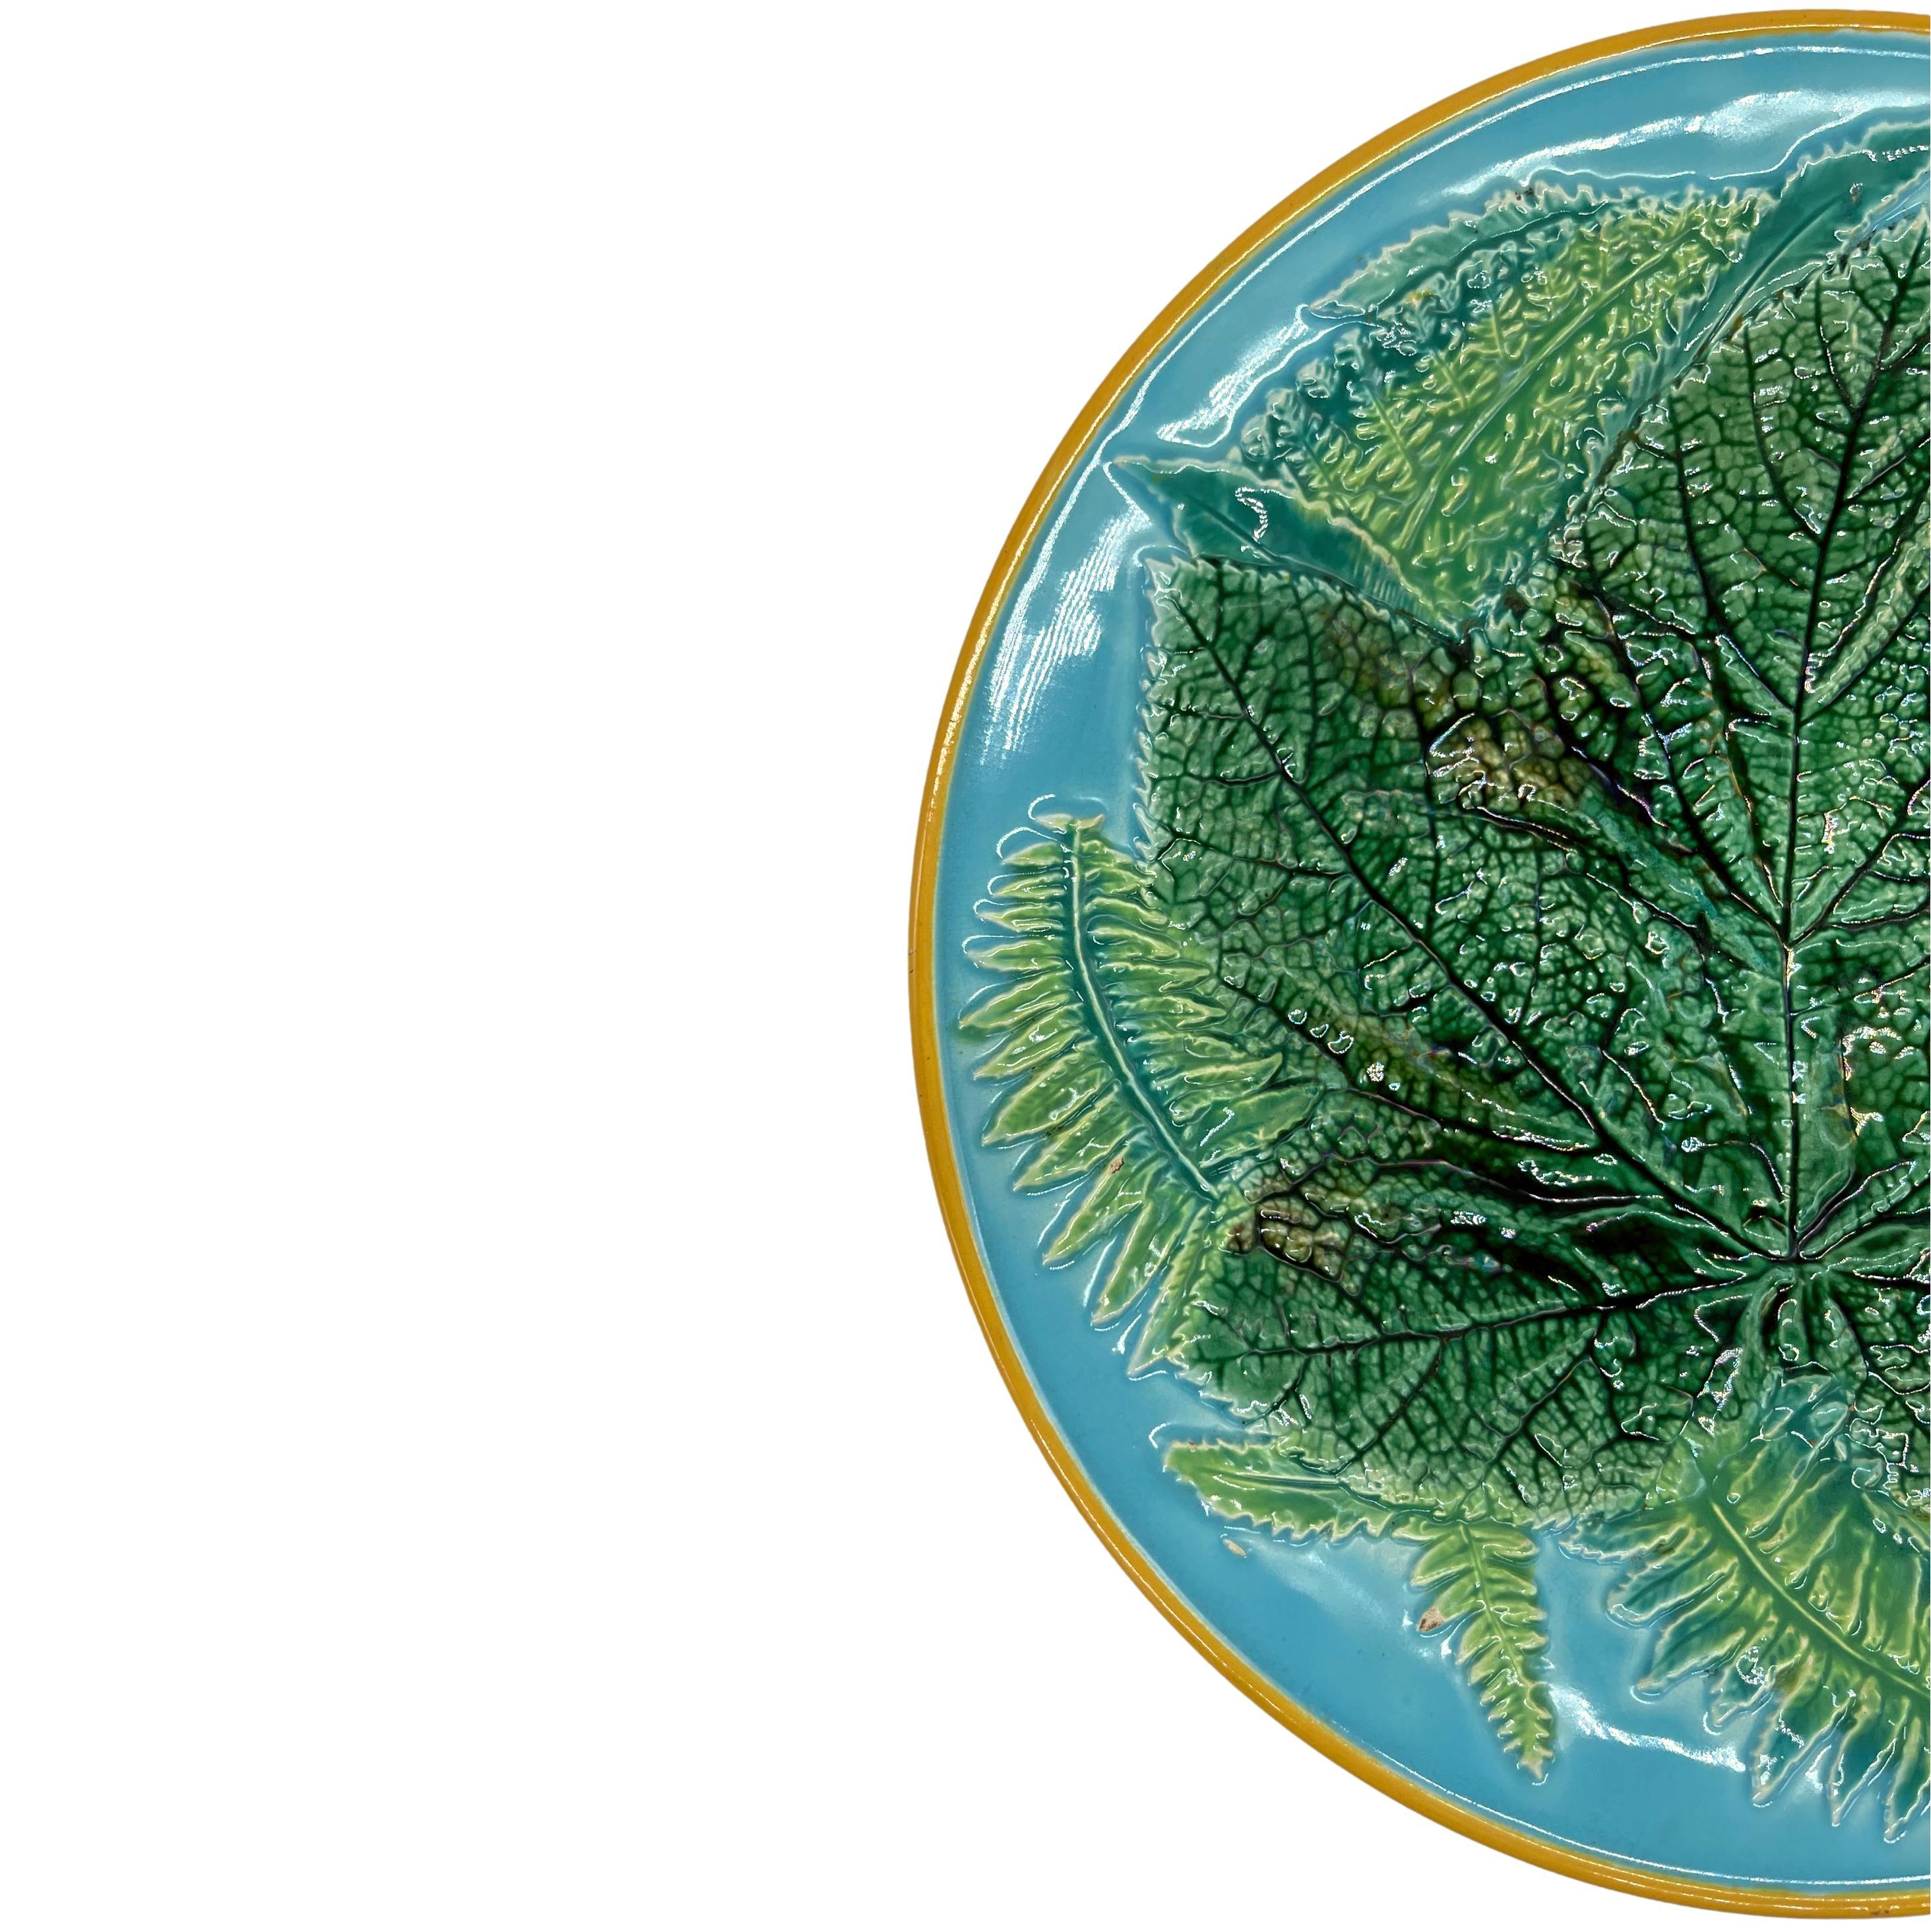 George Jones Majolica Maple Leaf and Ferns plate, English, ca. 1870, the relief molded dish with a central green-glazed maple leaf with ferns on a turquoise ground, the rim banded in yellow ocher, the reverse glazed in green and brown tortisehell